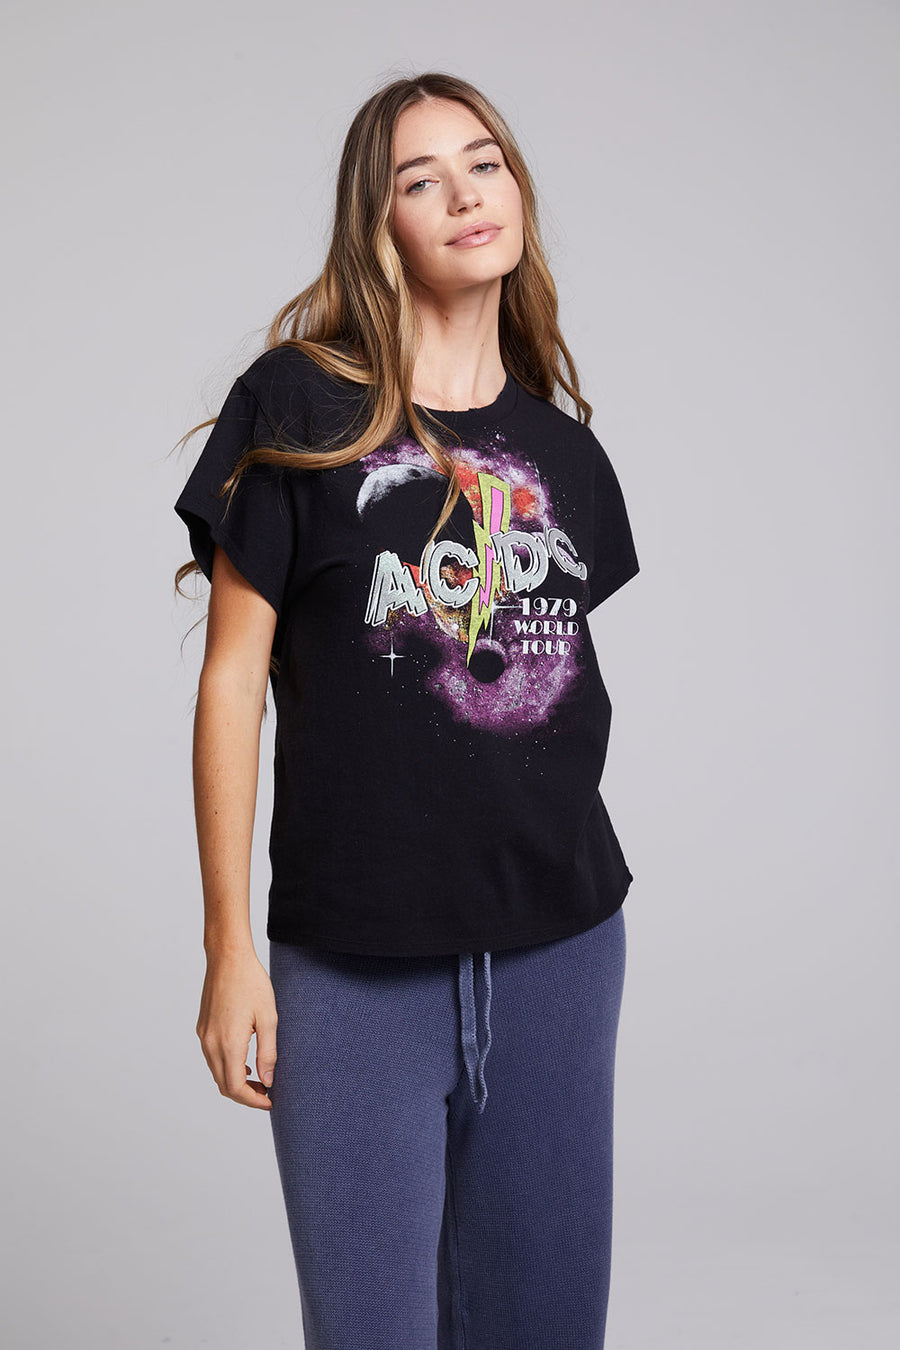 AC/DC 1978 World Tour Tee WOMENS chaserbrand